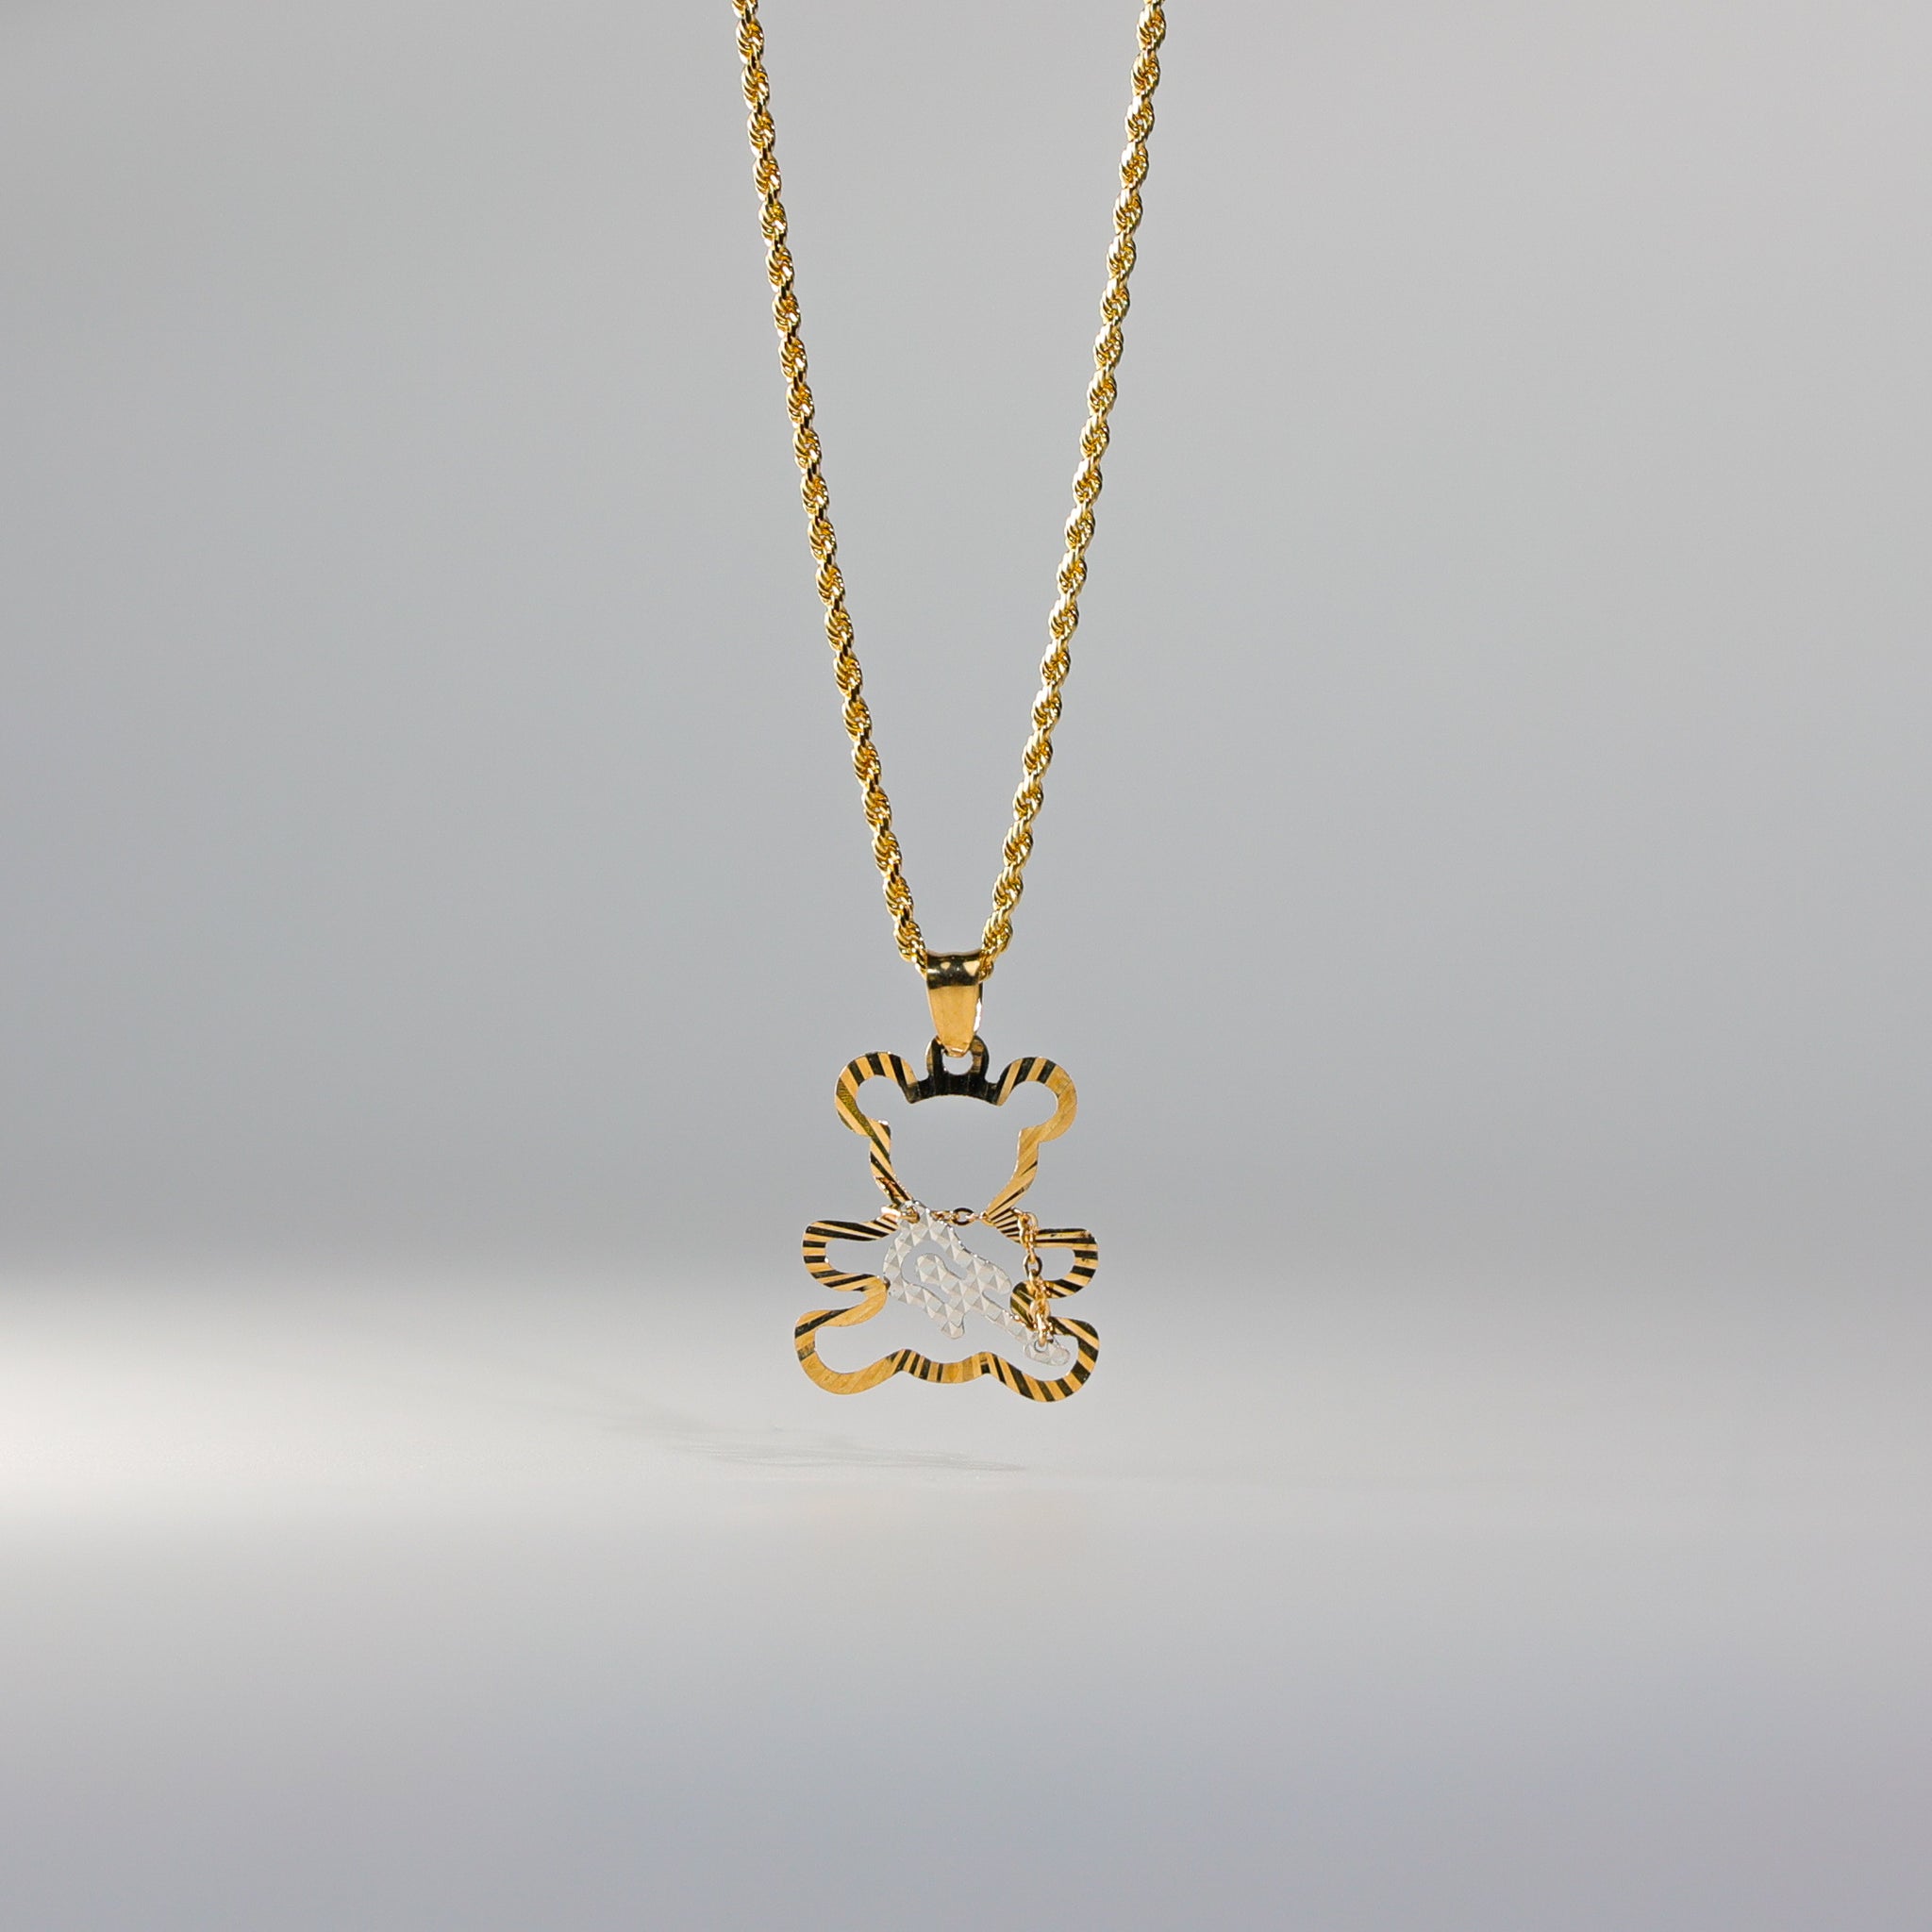 Gold Teddy Bear with Guitar Pendant Model-797 - Charlie & Co. Jewelry